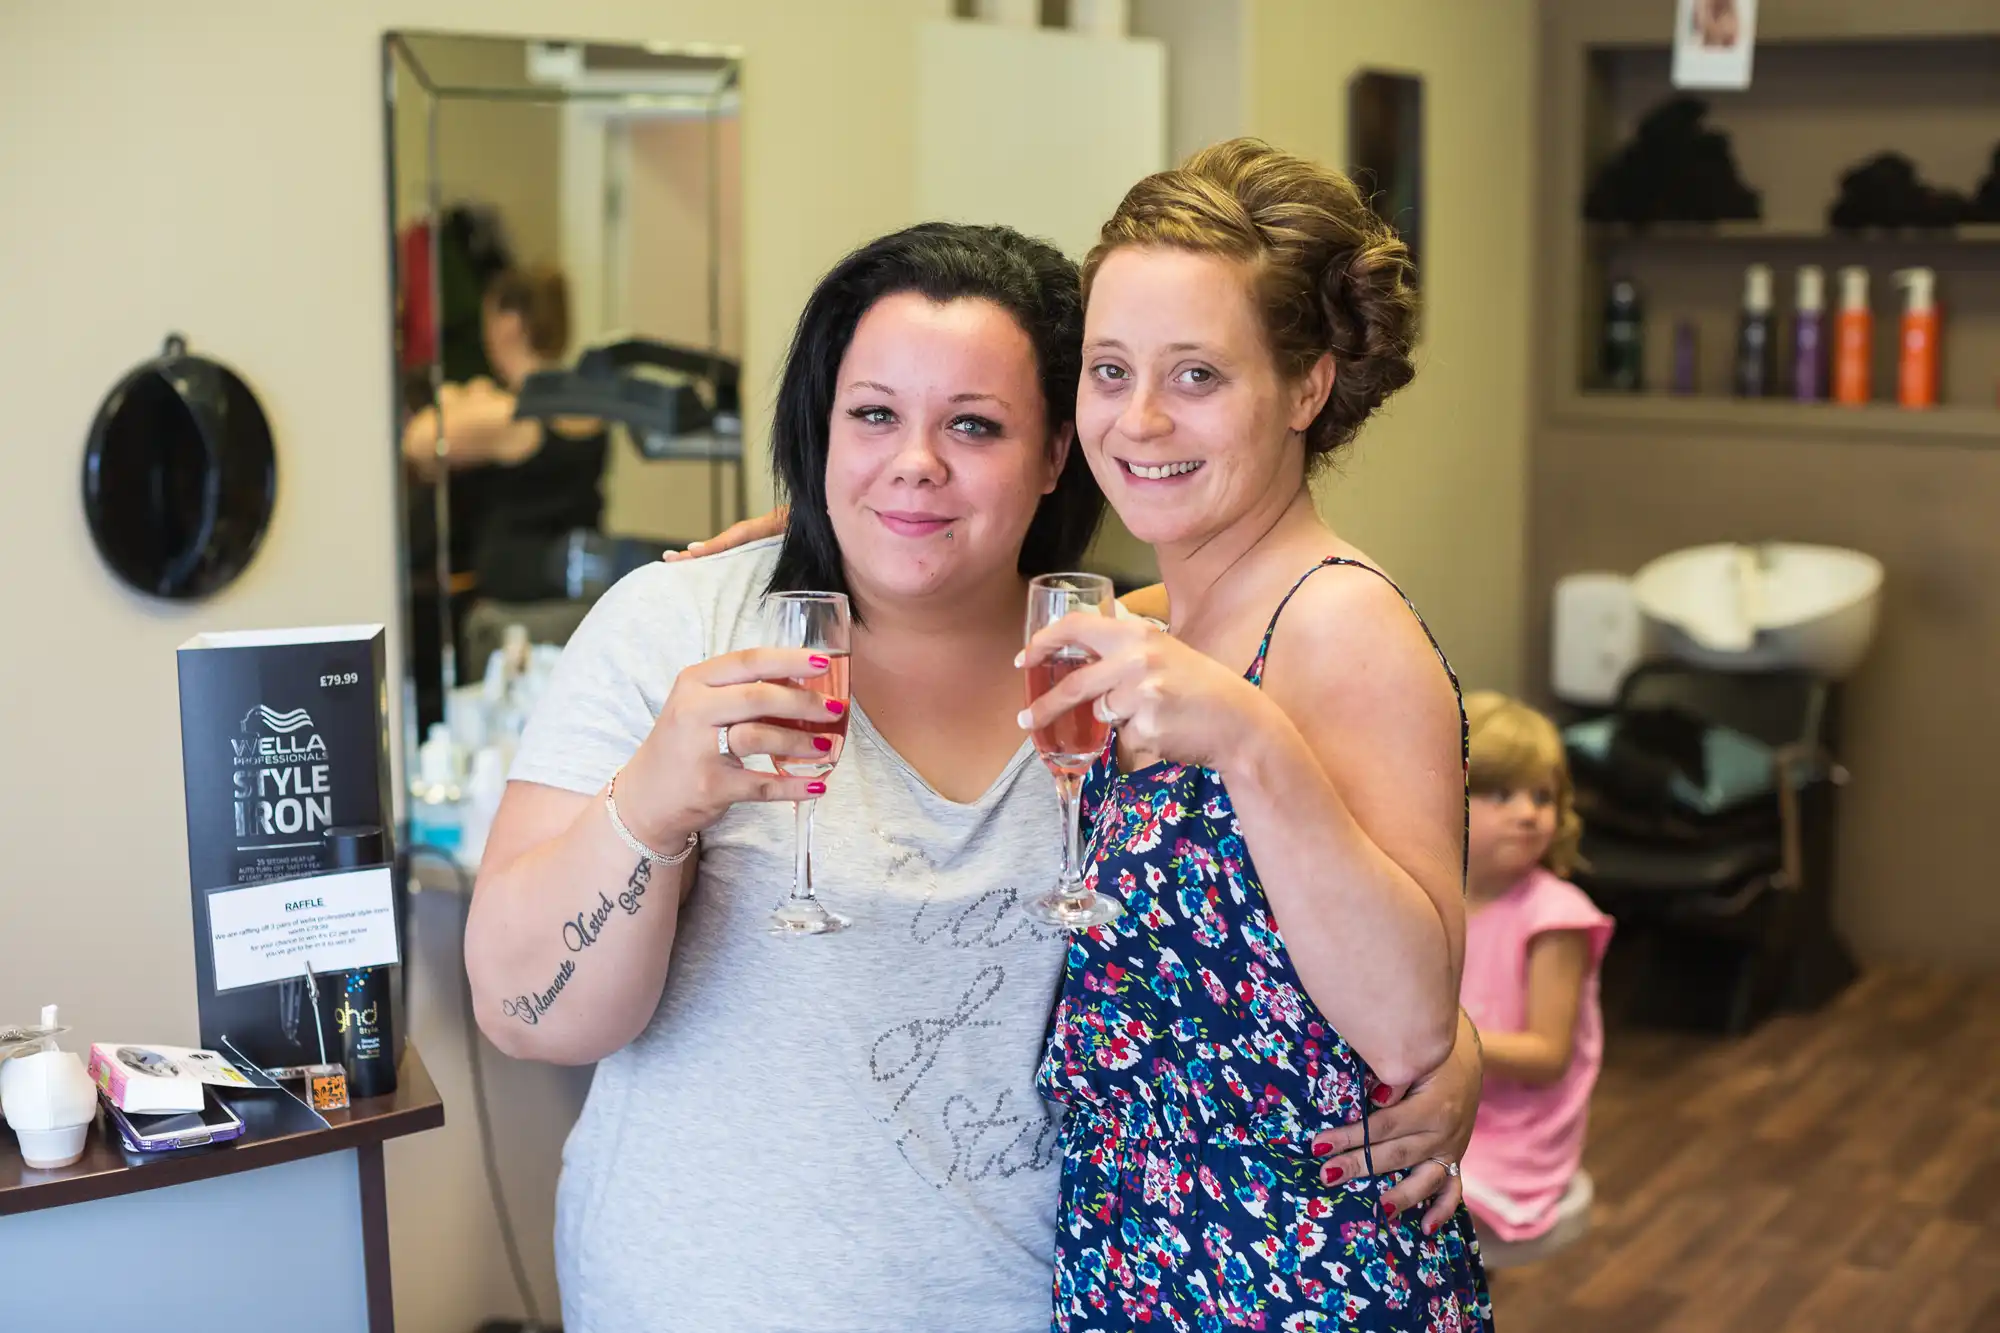 Two women smiling and toasting with glasses of wine in a hair salon, with a child visible in the background.